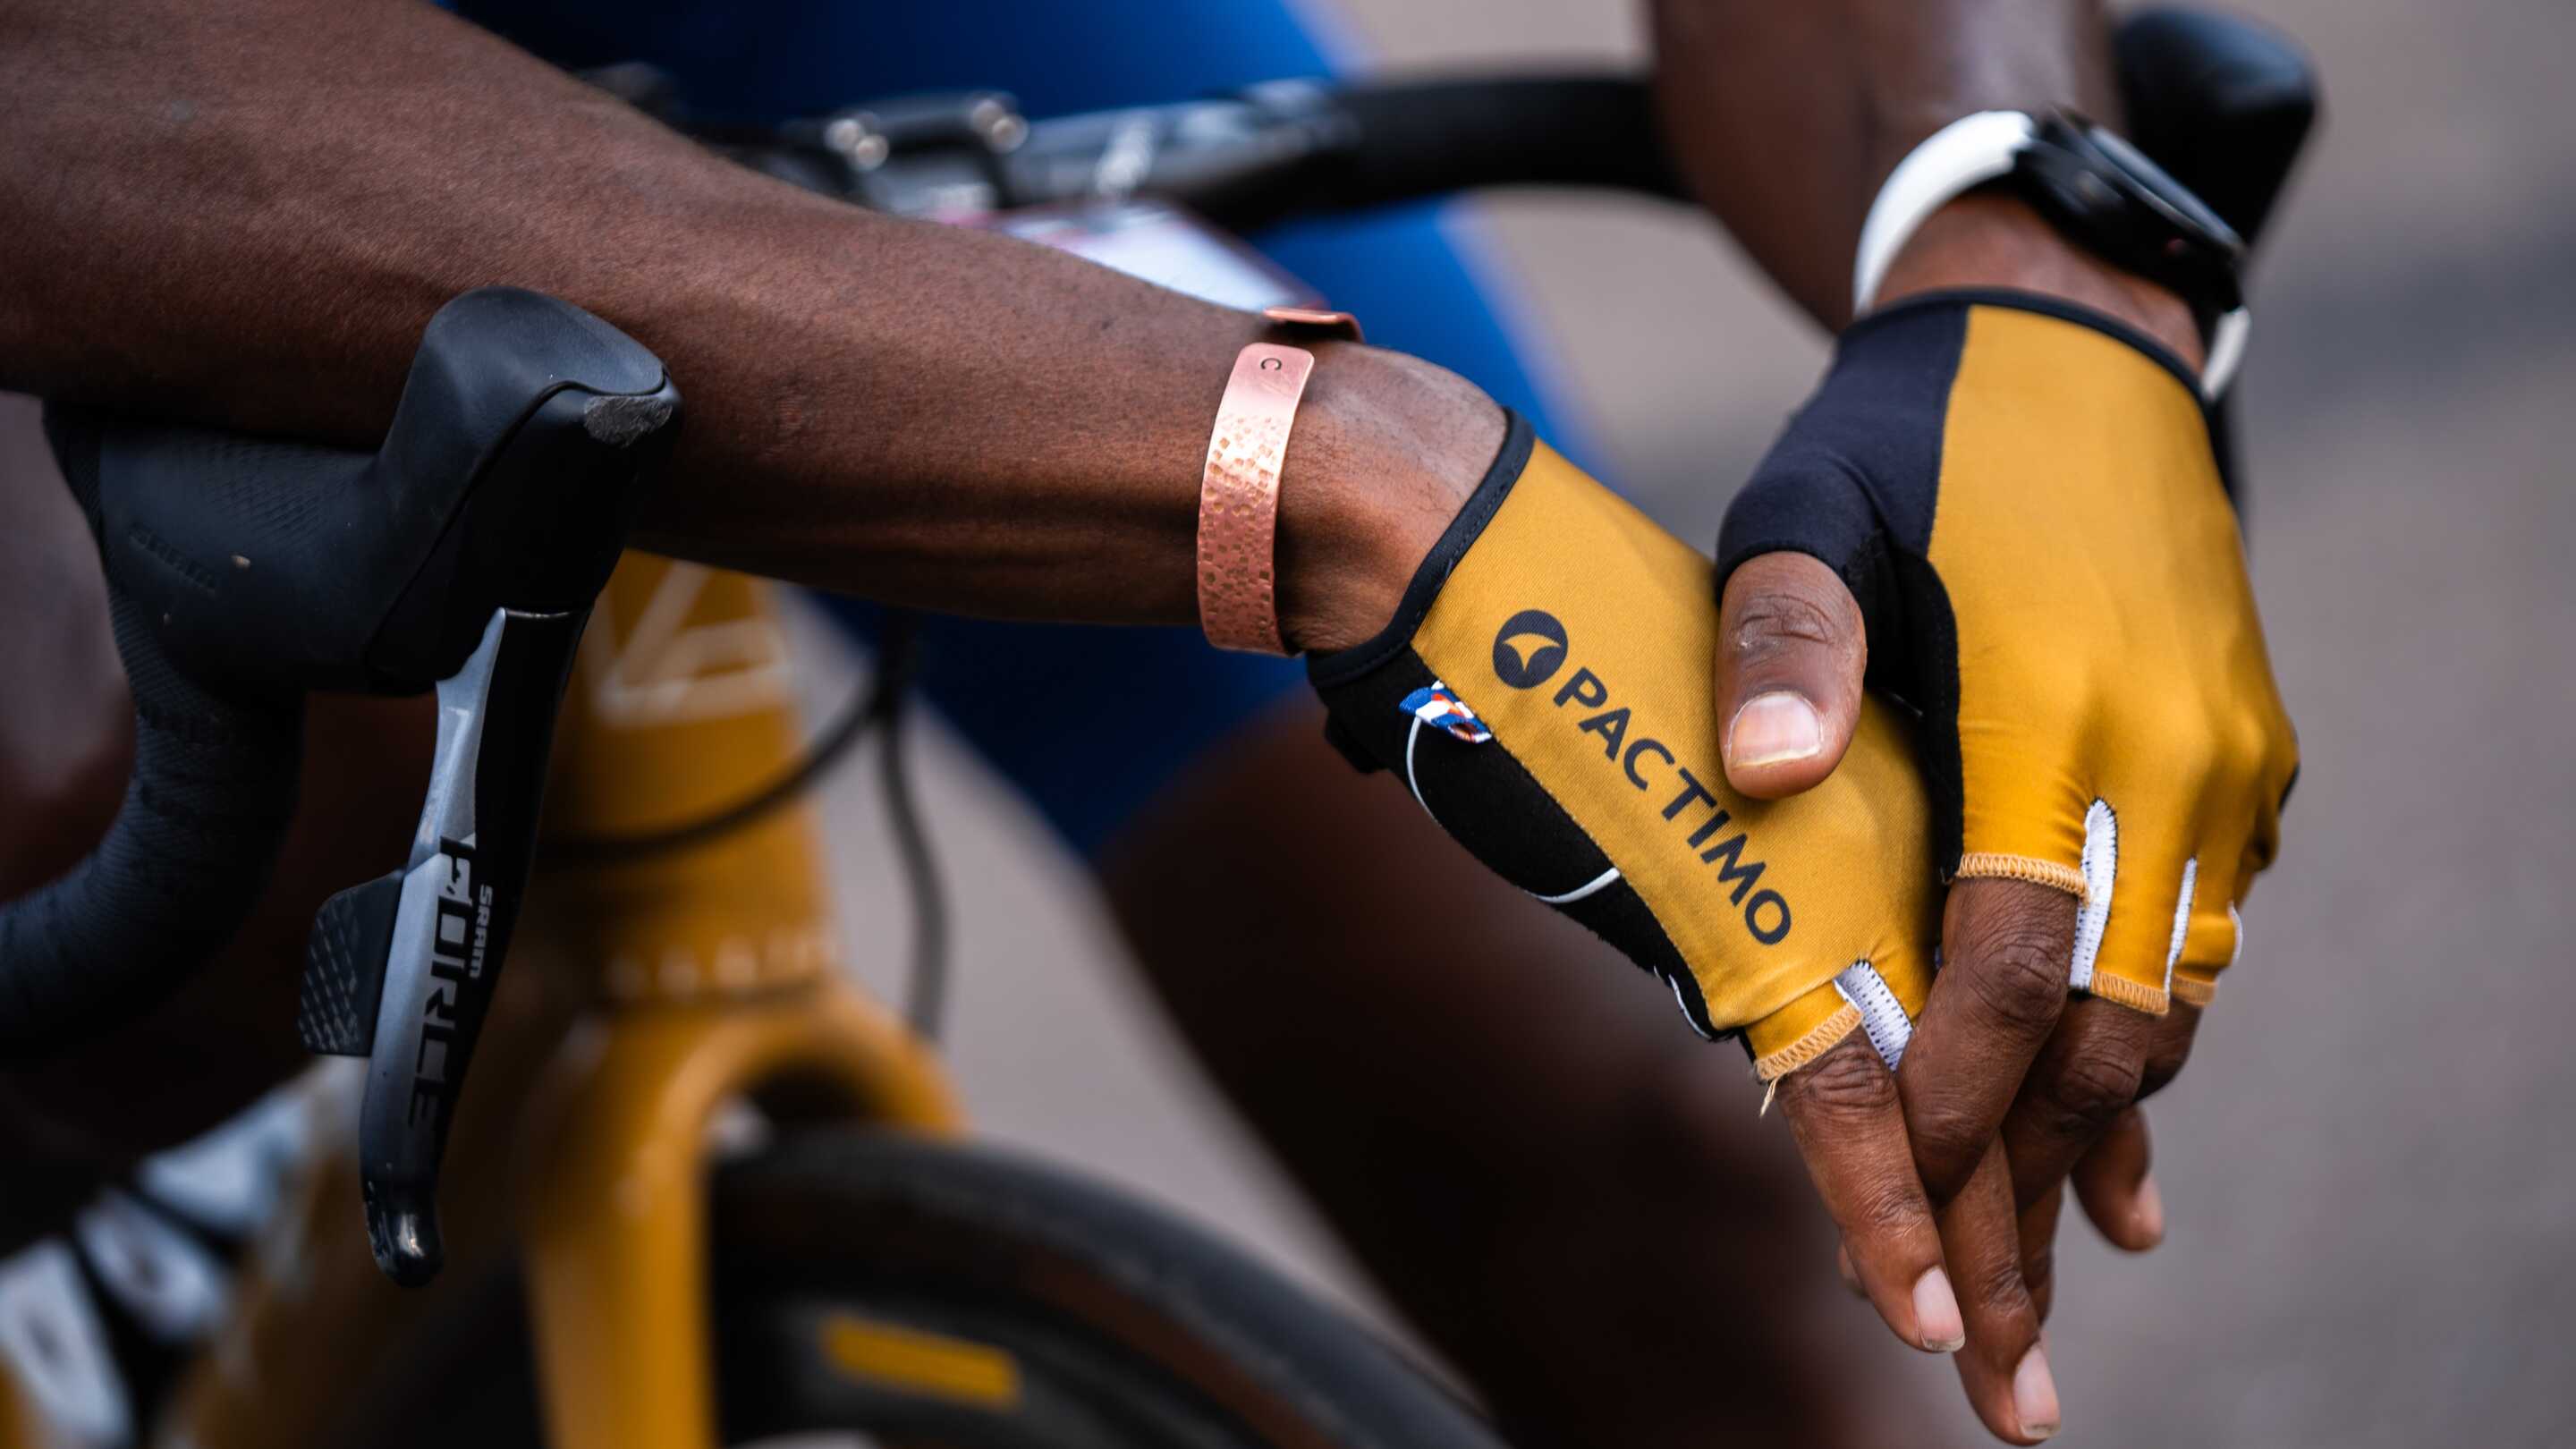 Cycling Gloves by primalblends